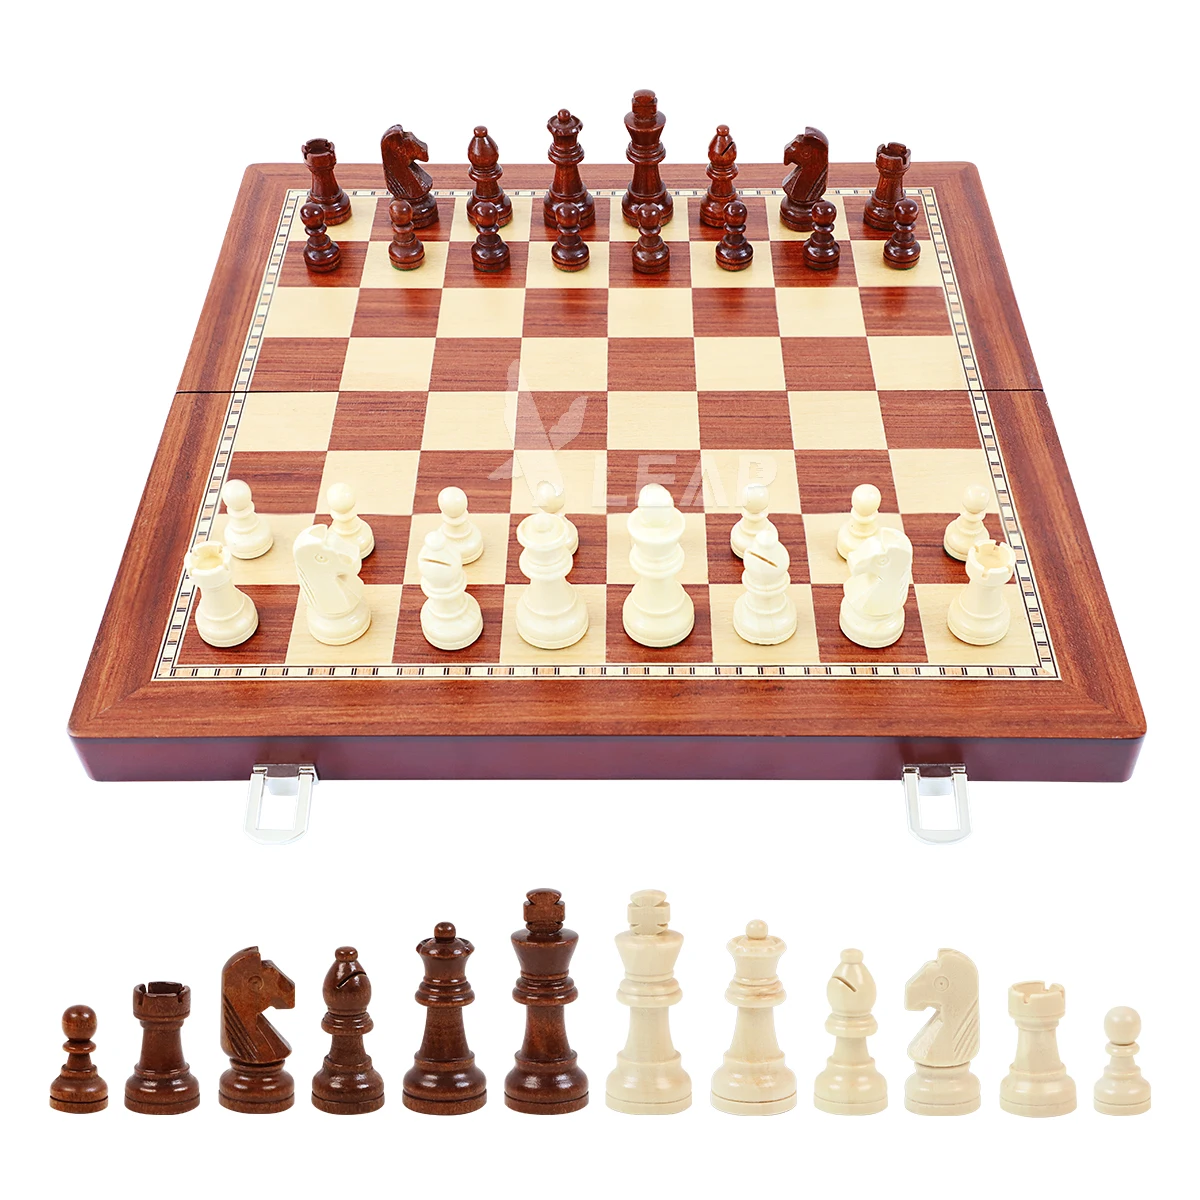 

Russian birch chess board set Wooden 35cm 14 inch Foldable chess set luxury 2.5 inch Staunton tournament chess pieces